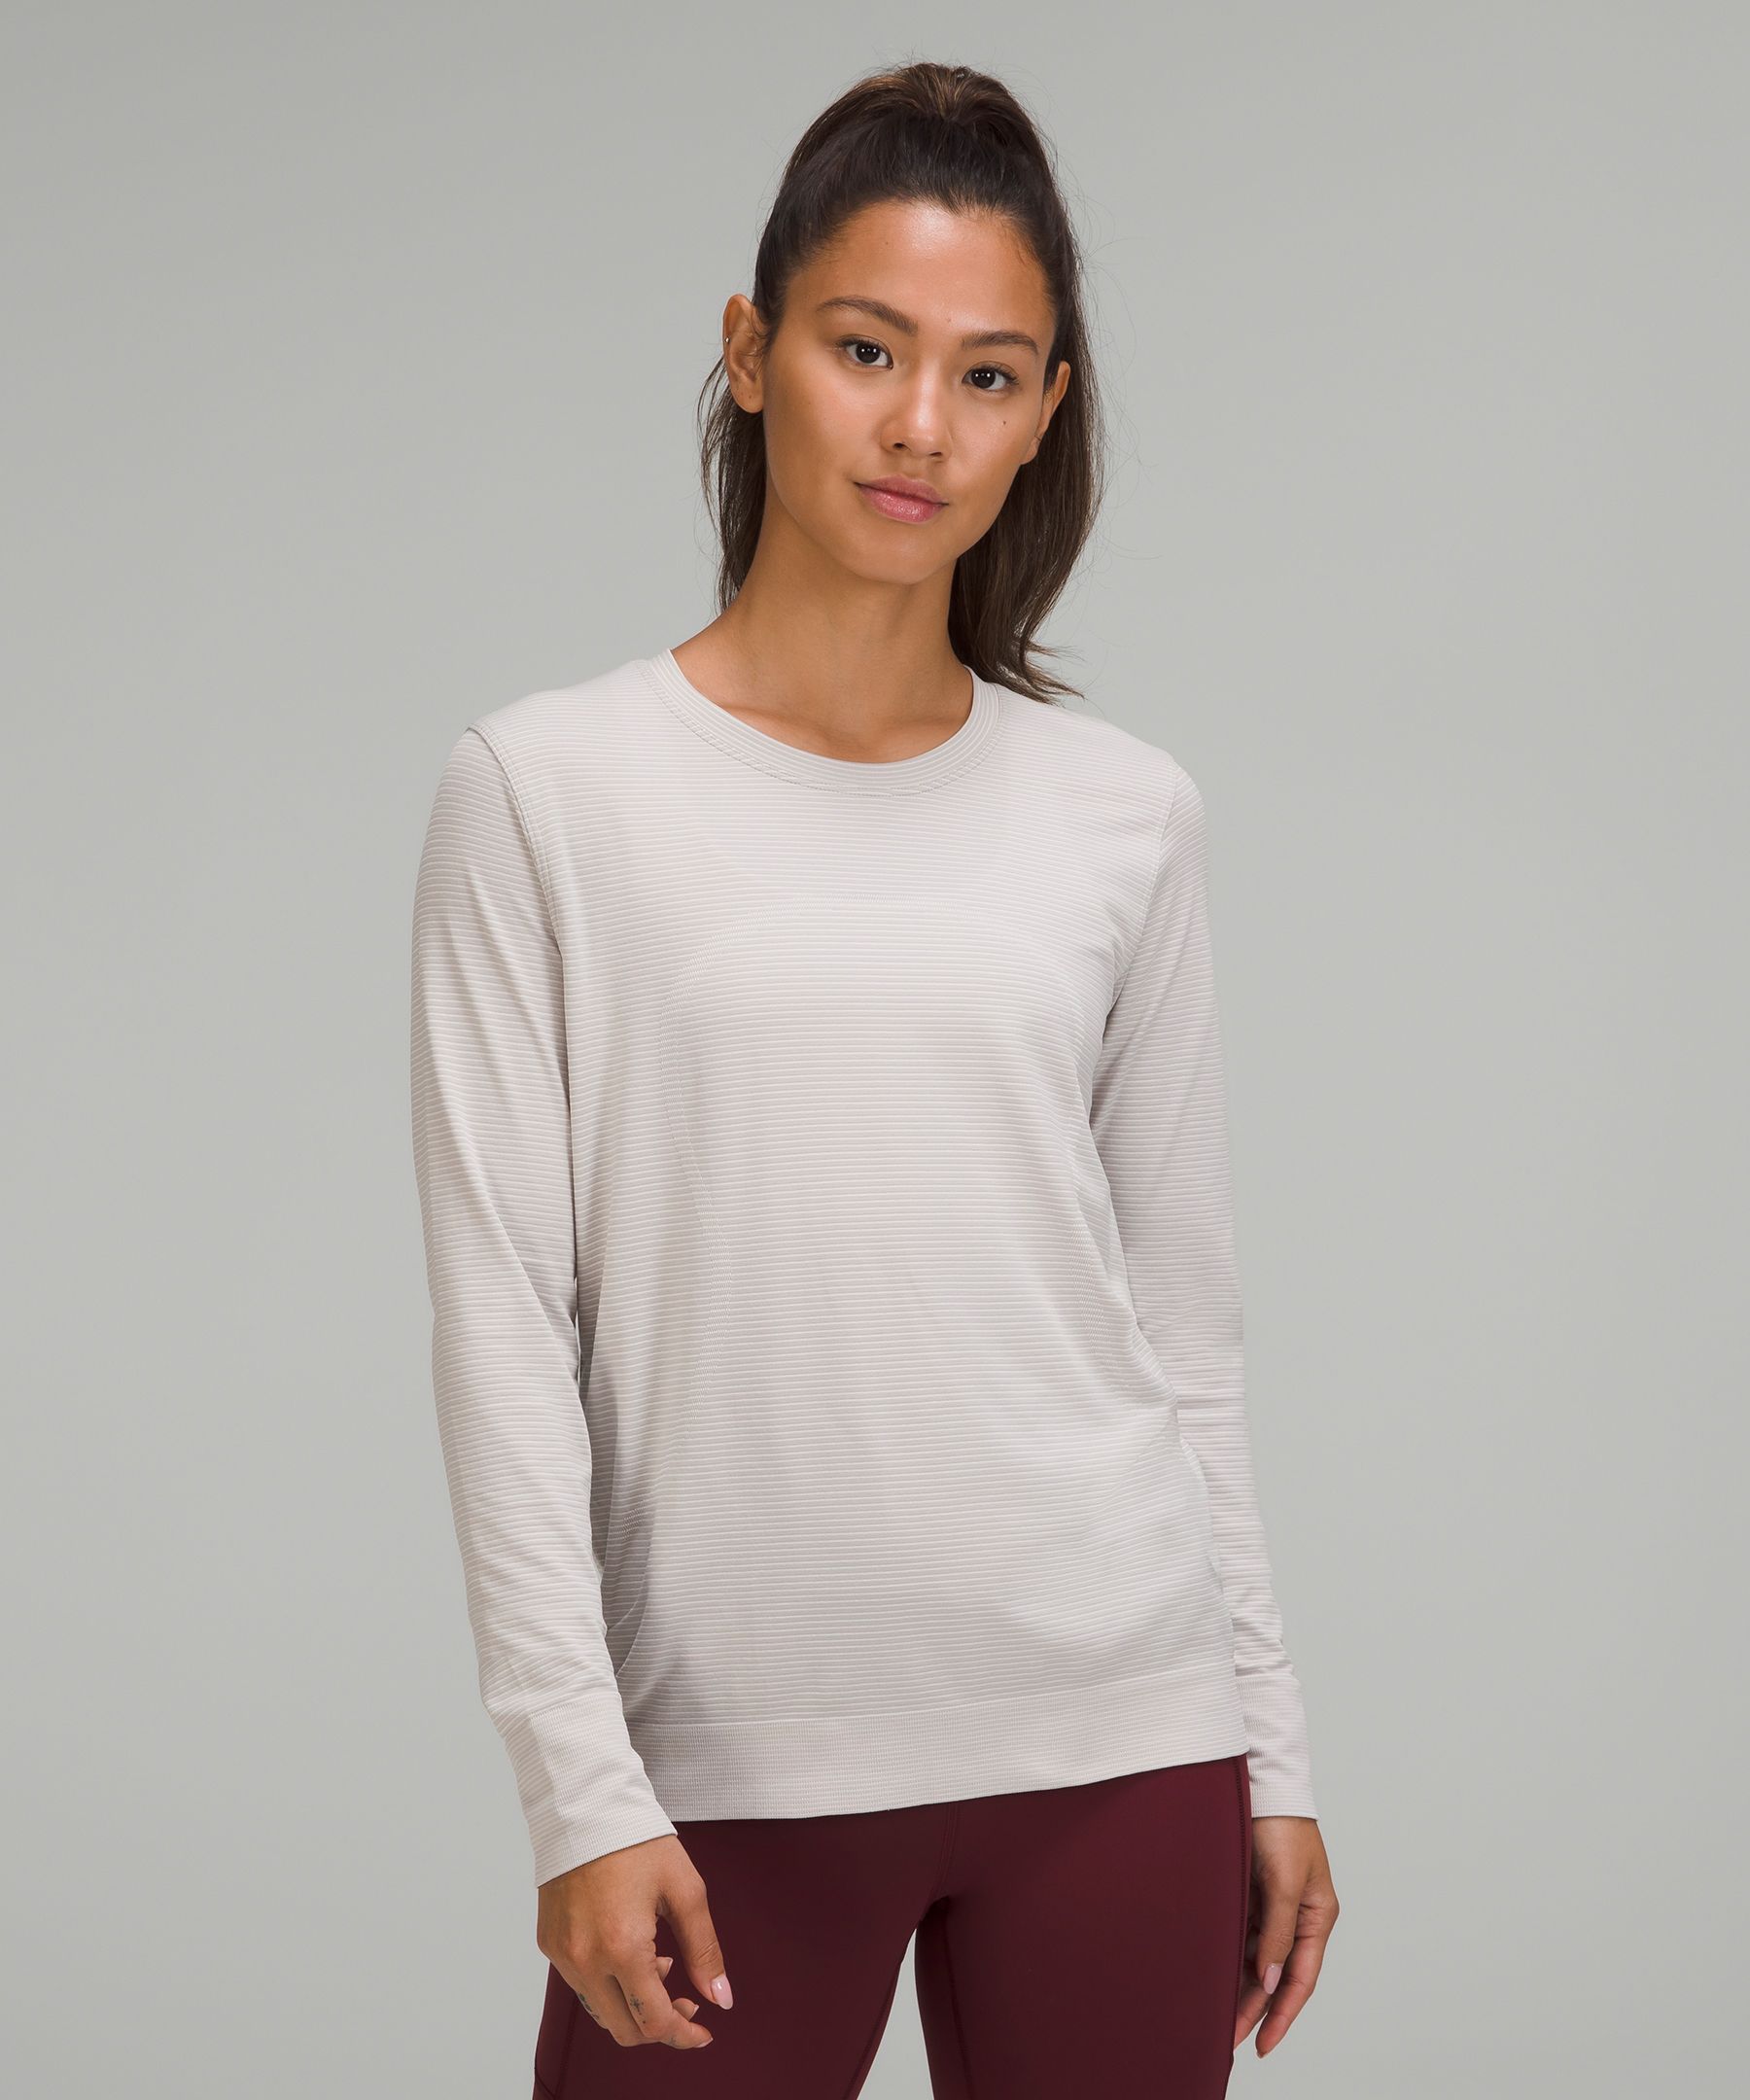 Lululemon Swiftly Relaxed-fit Long Sleeve Shirt In Tempo Stripe Chrome/white